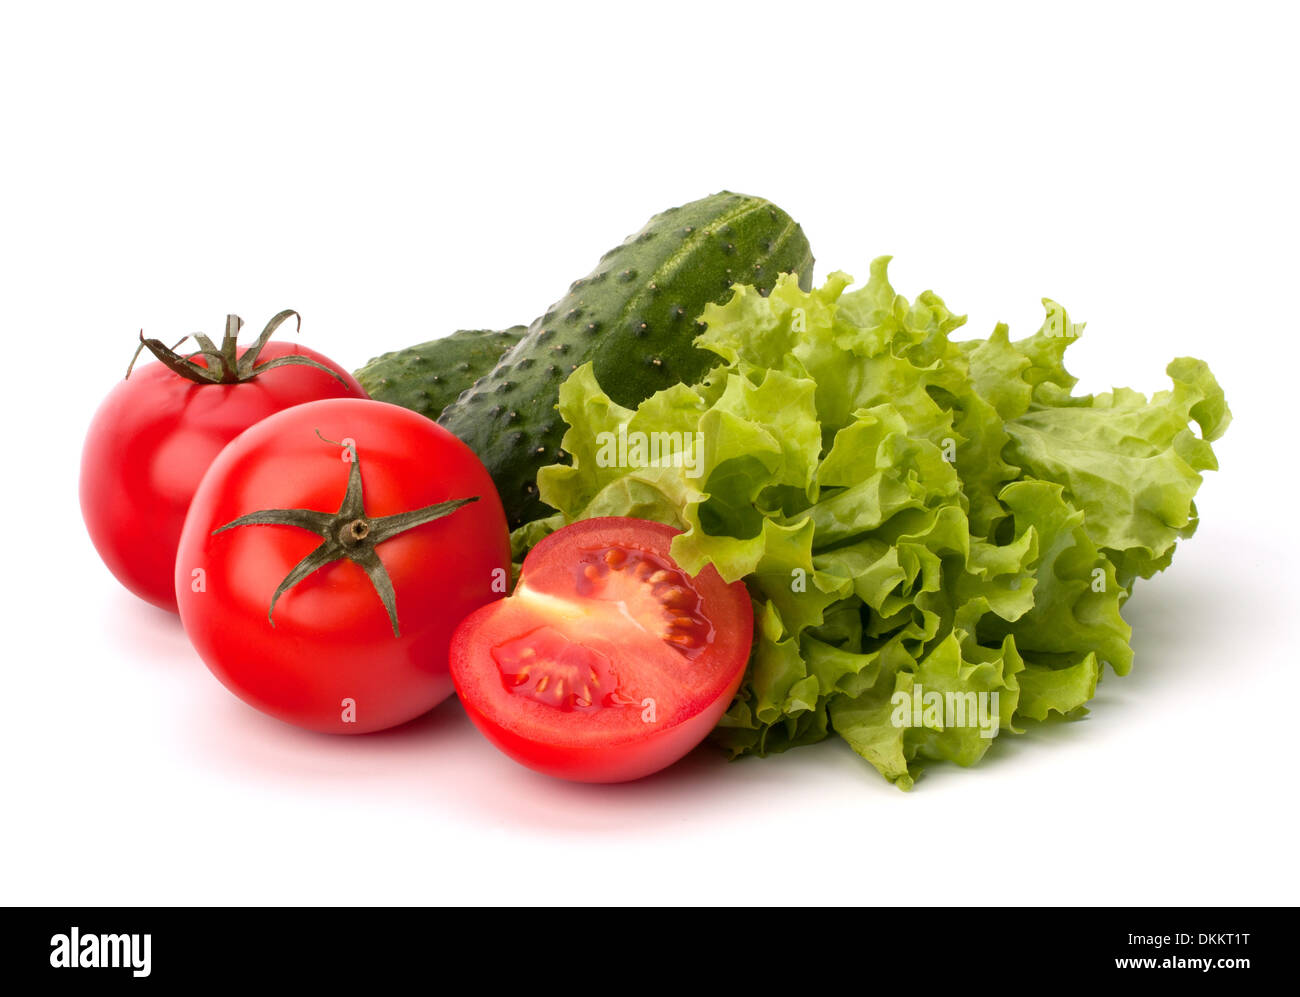 Tomato, cucumber vegetable and lettuce salad isolated on white ...